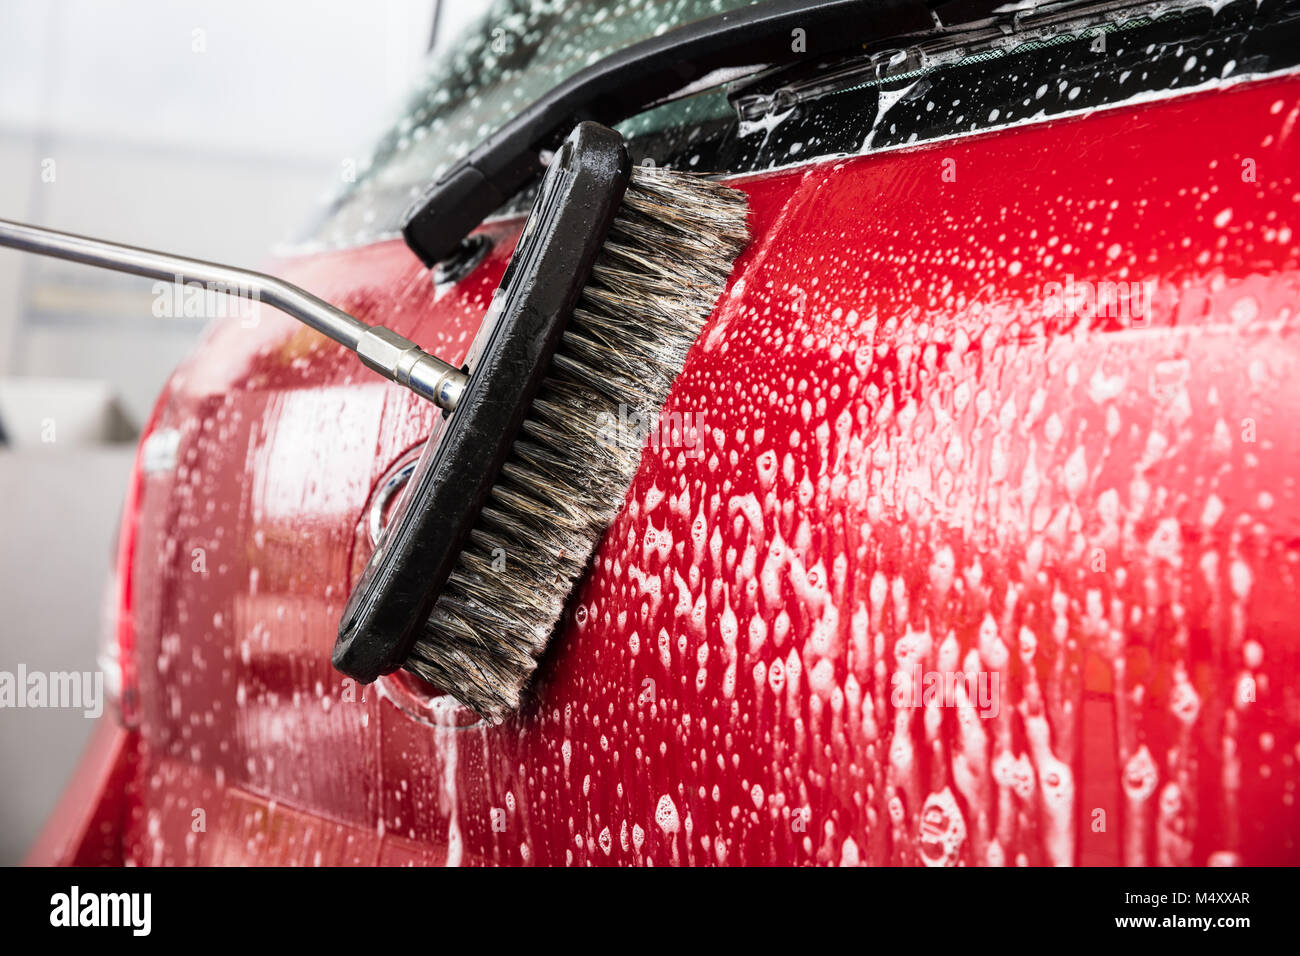 Close-up Of Person's Hand Washing Car Using Broom Stock Photo - Alamy